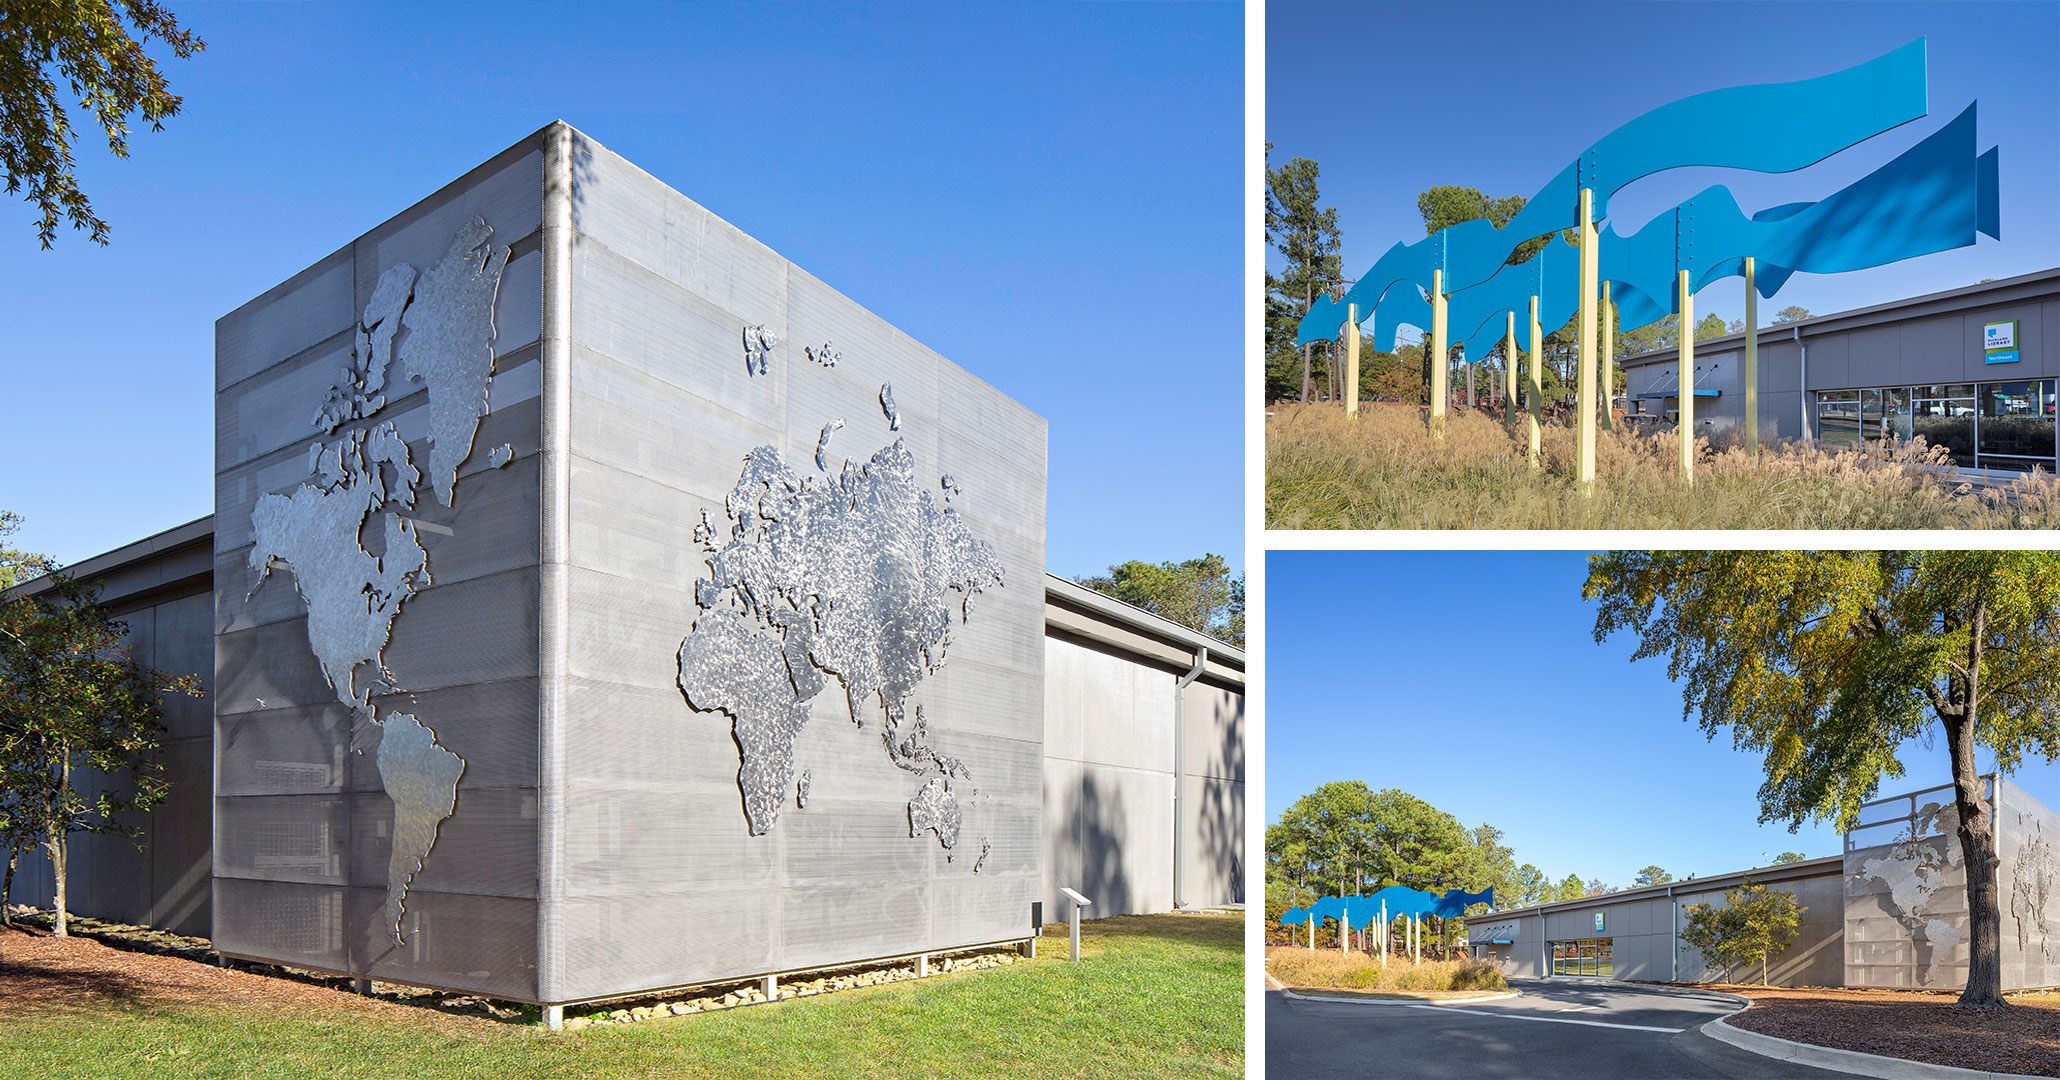 Boudreaux architects worked with the Richland Library to update the exterior of Richland Library Northeast Branch Location. Working with local artists we embraced the international corridor.